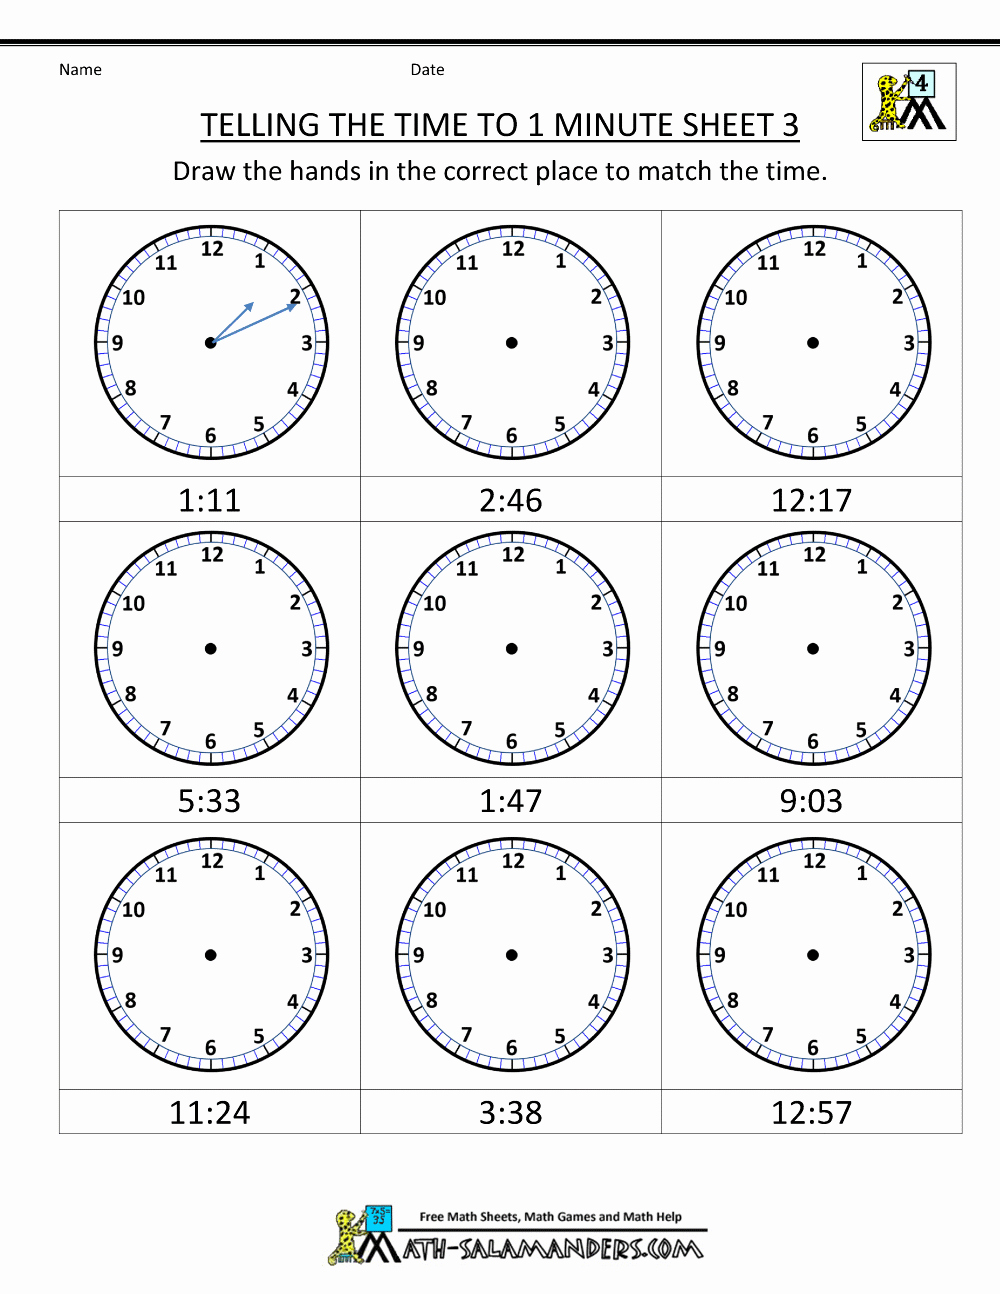 How to Make Time Sheets New Clock Worksheets to 1 Minute